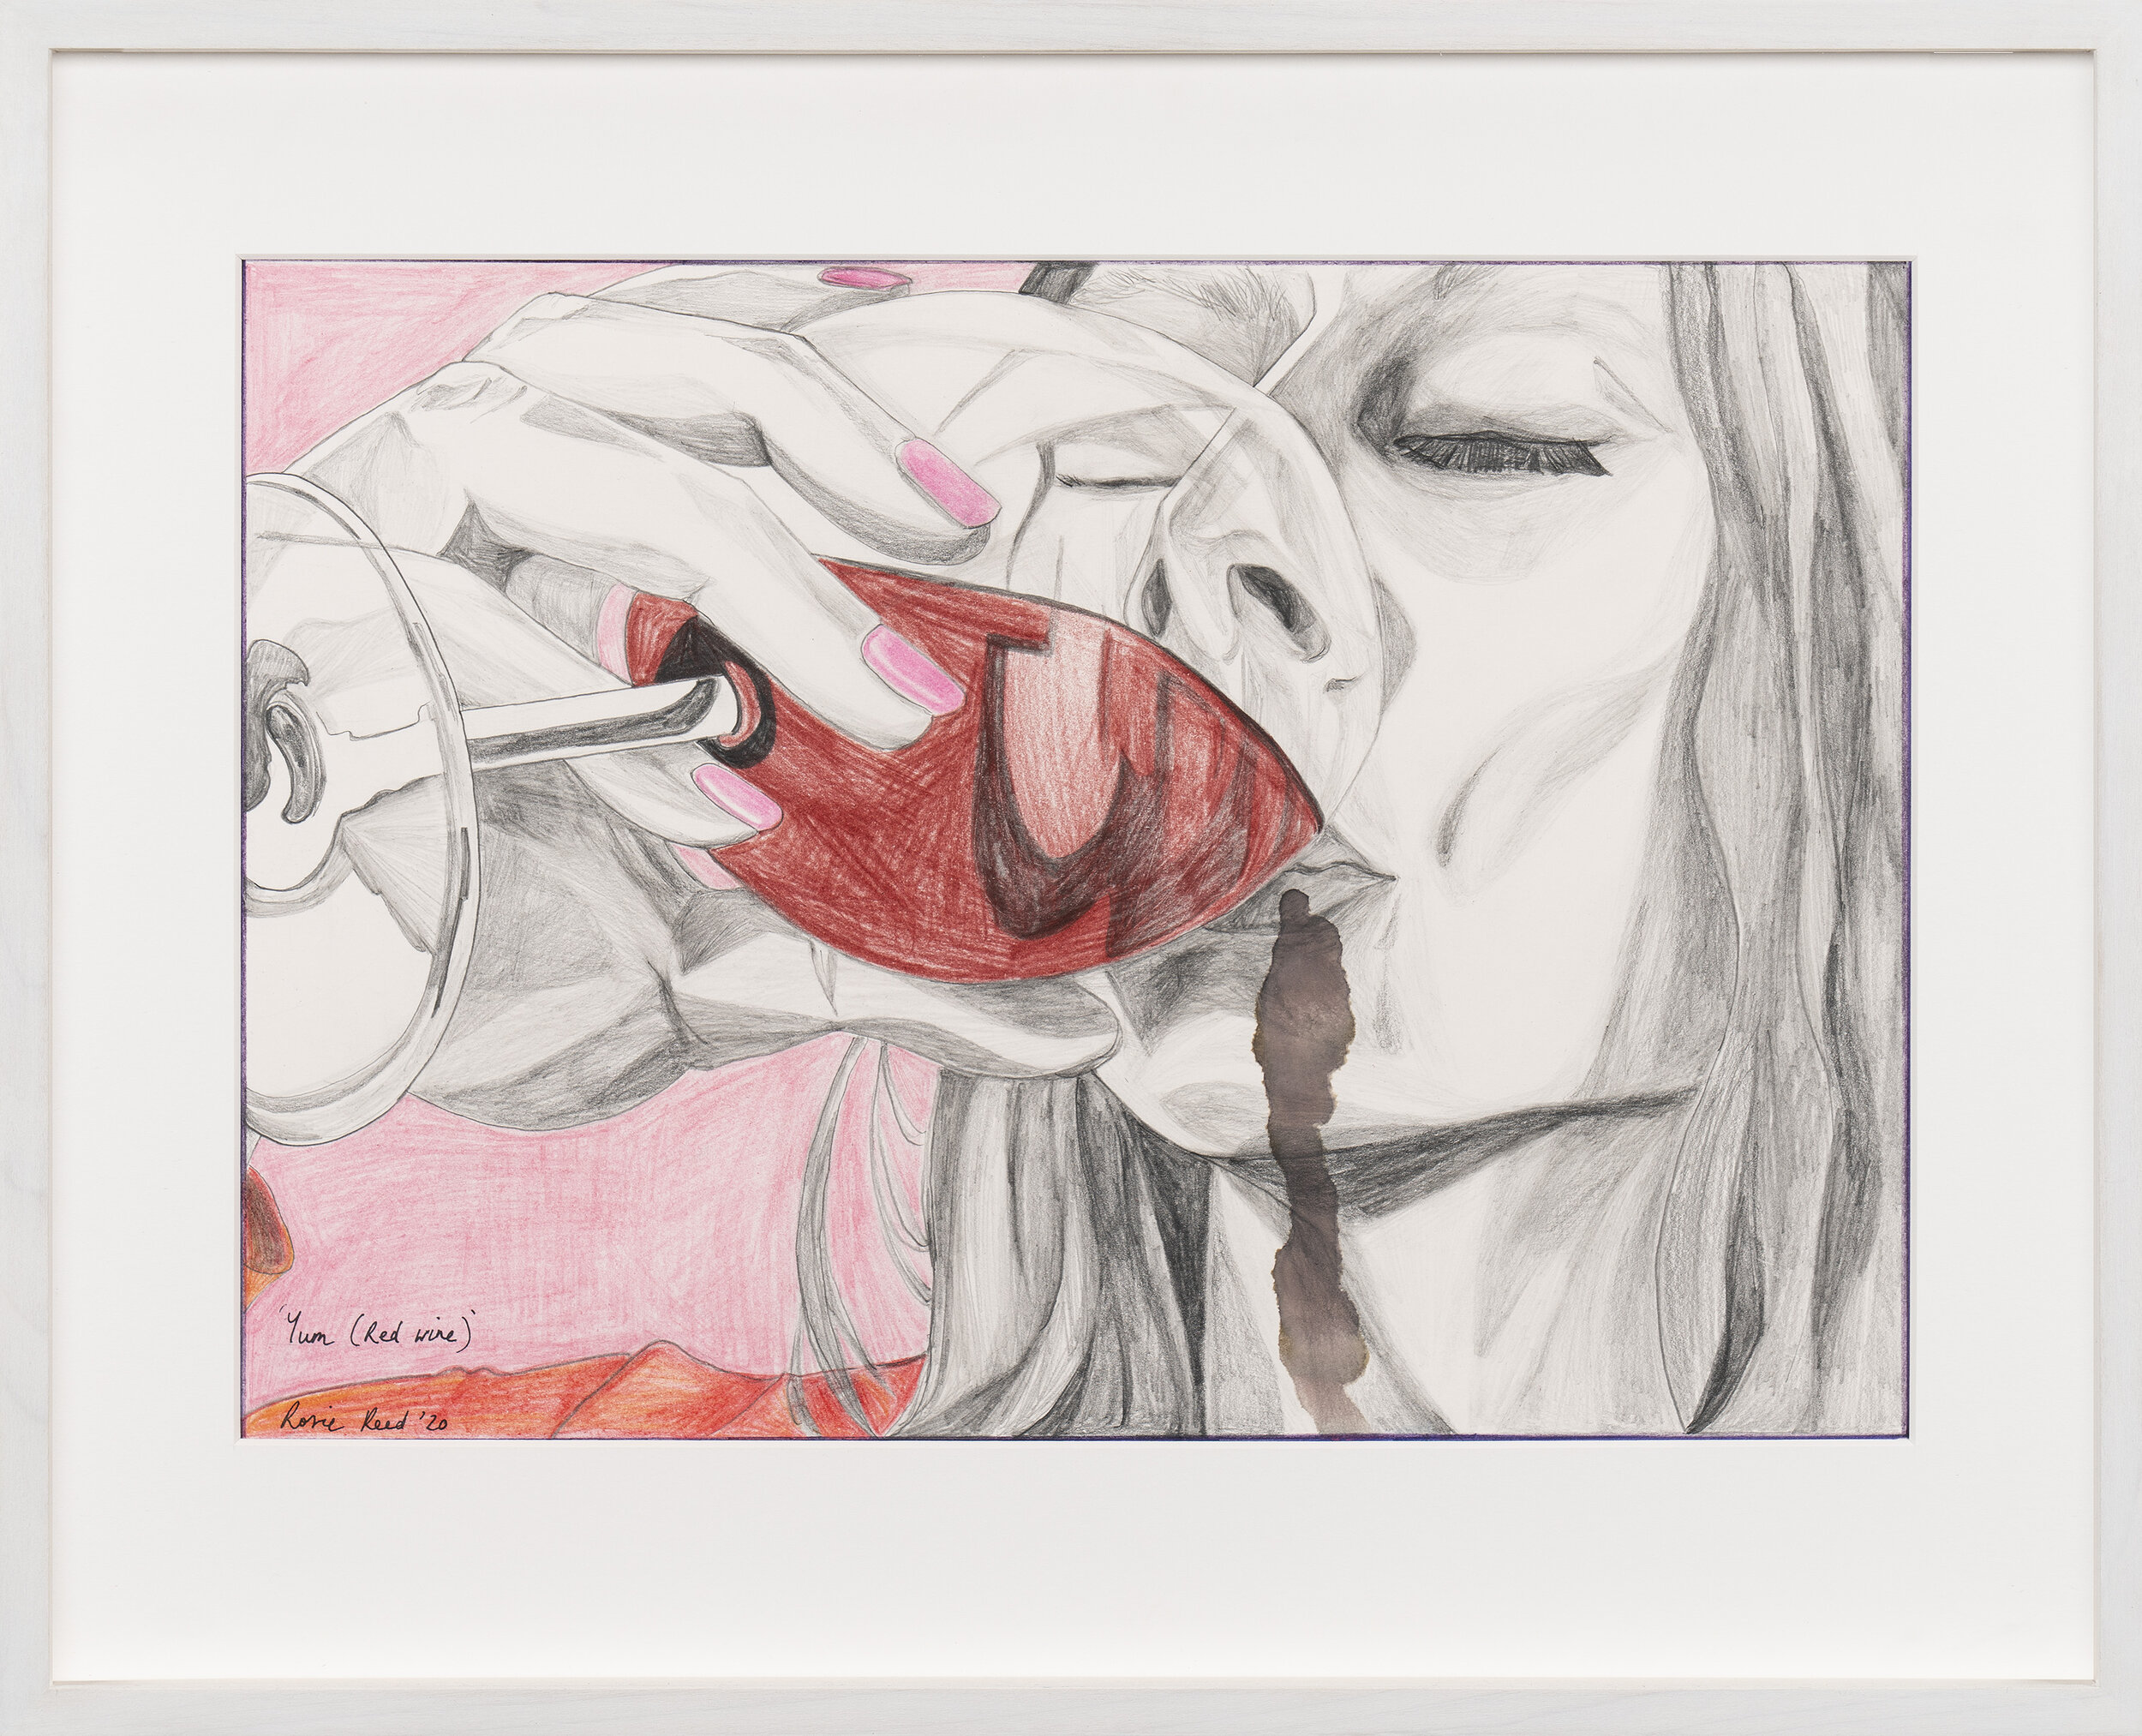 Pencil & red wine on paper, 40 x 49 cm, 2020